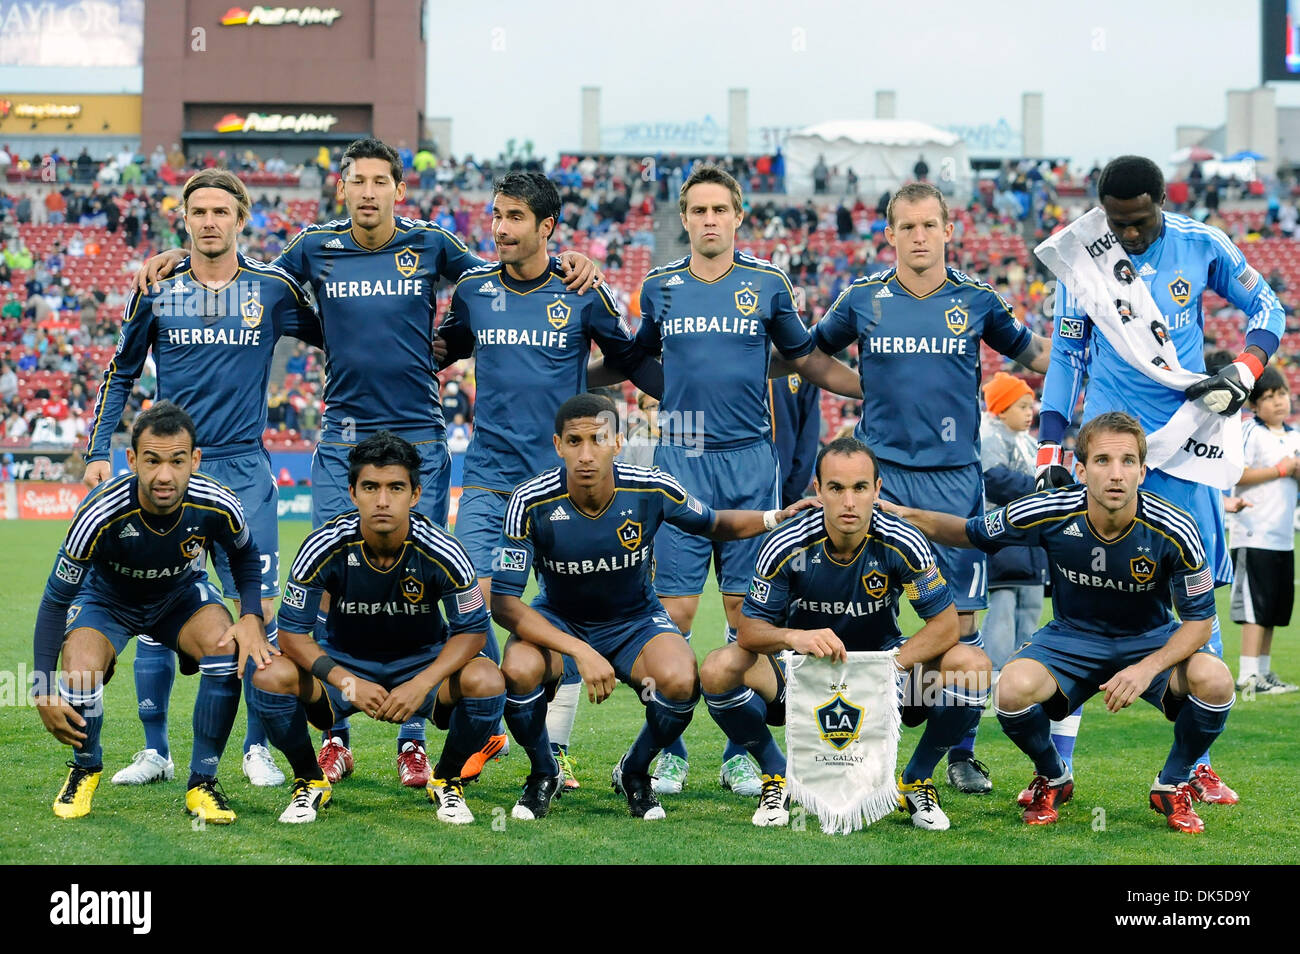 May 1, 2011 - Frisco, Texas, U.S - LA Galaxy team photo prior to kick off as the LA Galaxy faces off against rival FC Dallas at the Pizza Hut Park in Frisco, Texas.  FC Dallas tops the LA Galaxy in a rain soaked match, 2-1. (Credit Image: © Steven Leija/Southcreek Global/ZUMAPRESS.com) Stock Photo